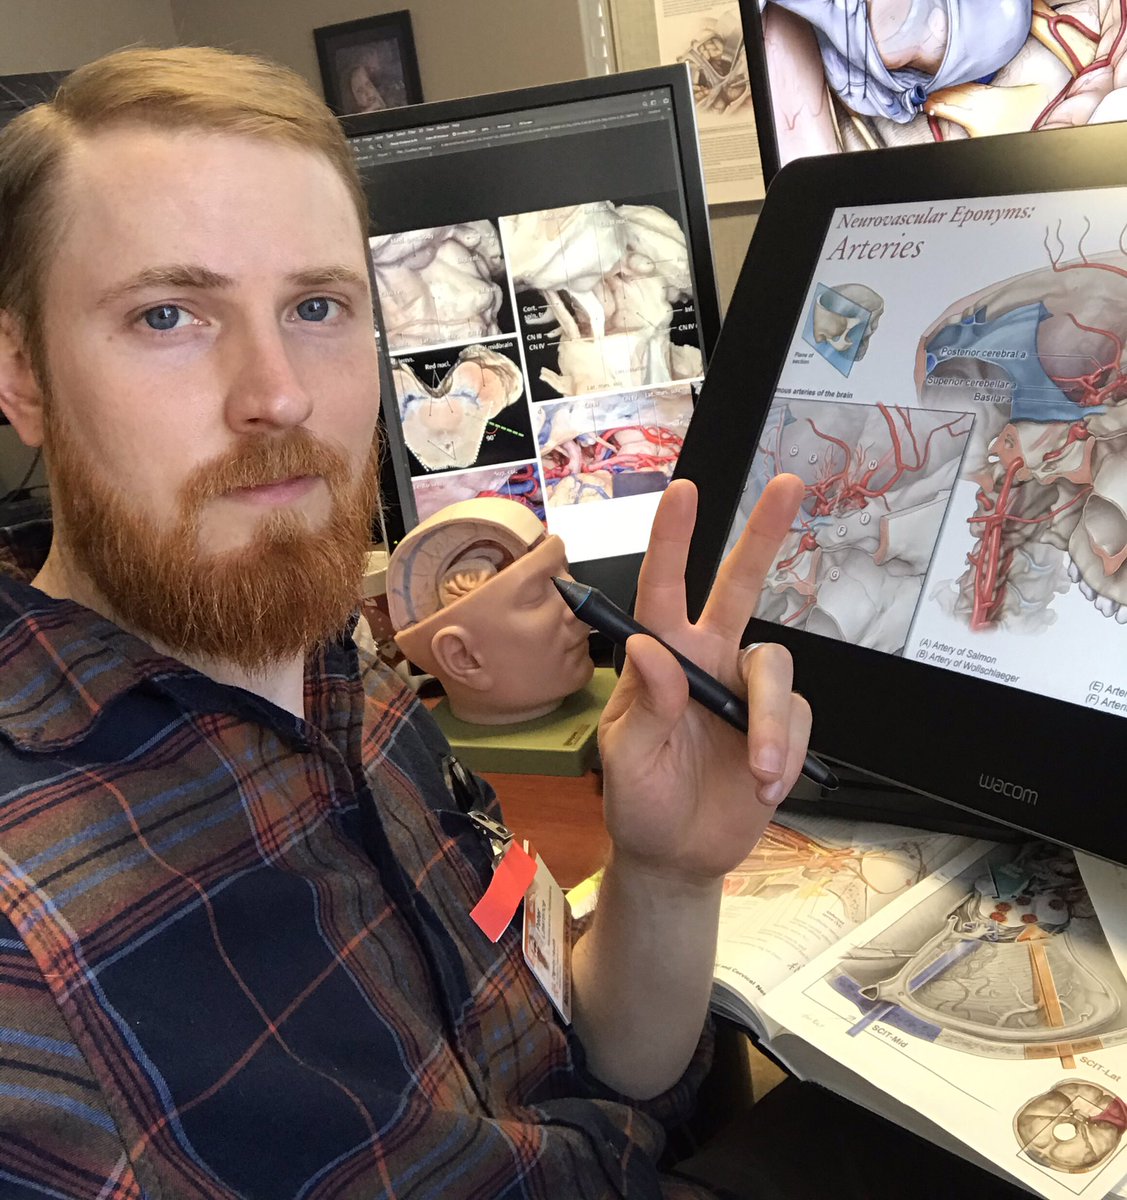 “Artist behind the art” challenge...Also, on my cintiq monitor is a little sneak peak of a poster that will be available in my shop soon! #medicalillustrator